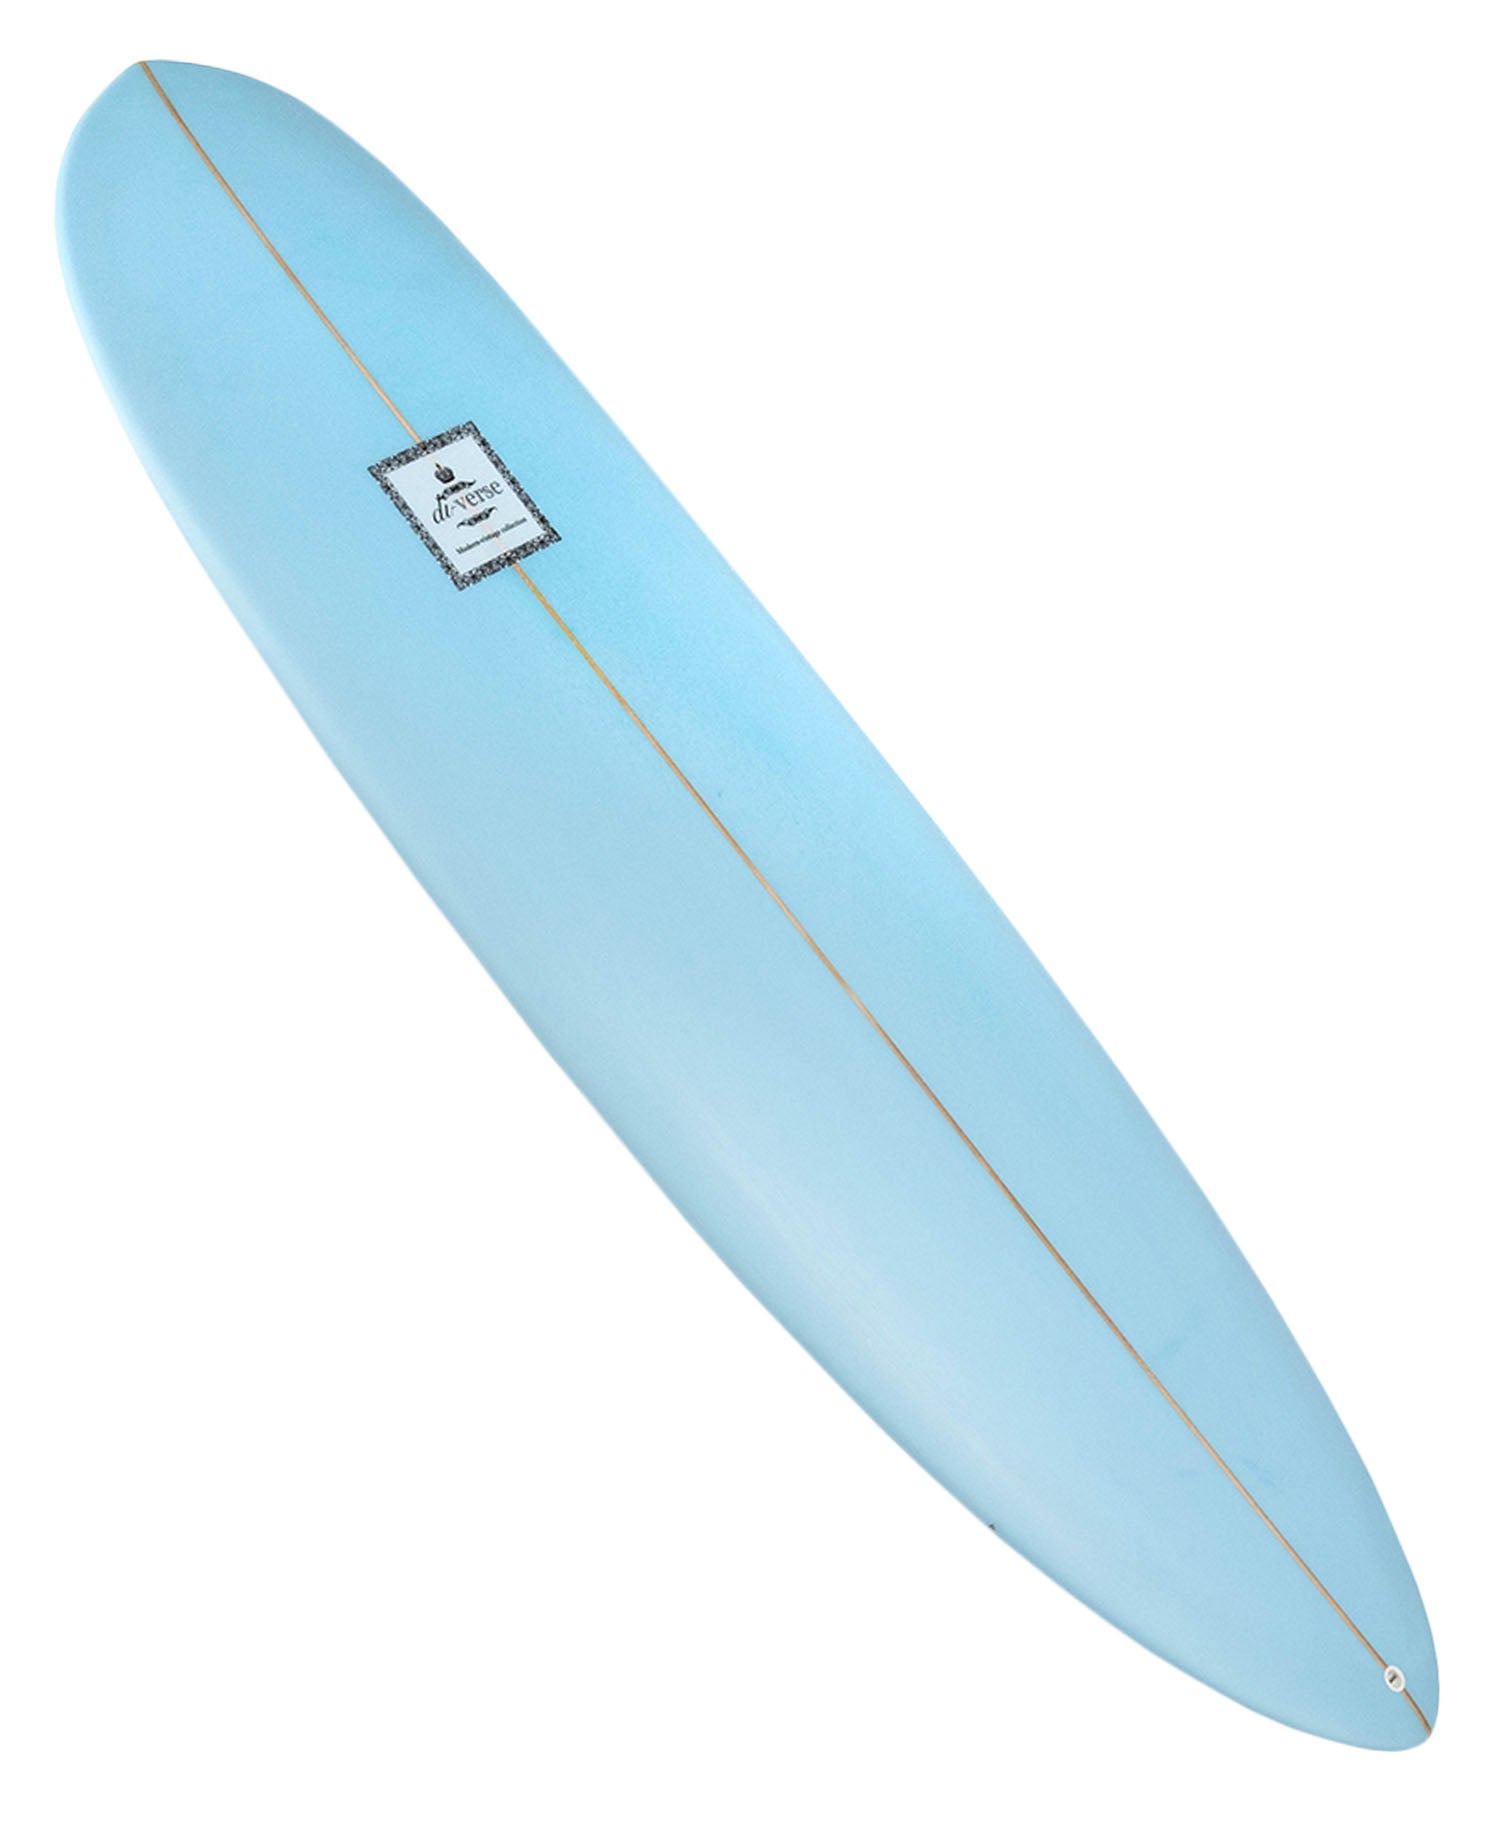 Diverse-style-commander-mid-length-surfboard-blue